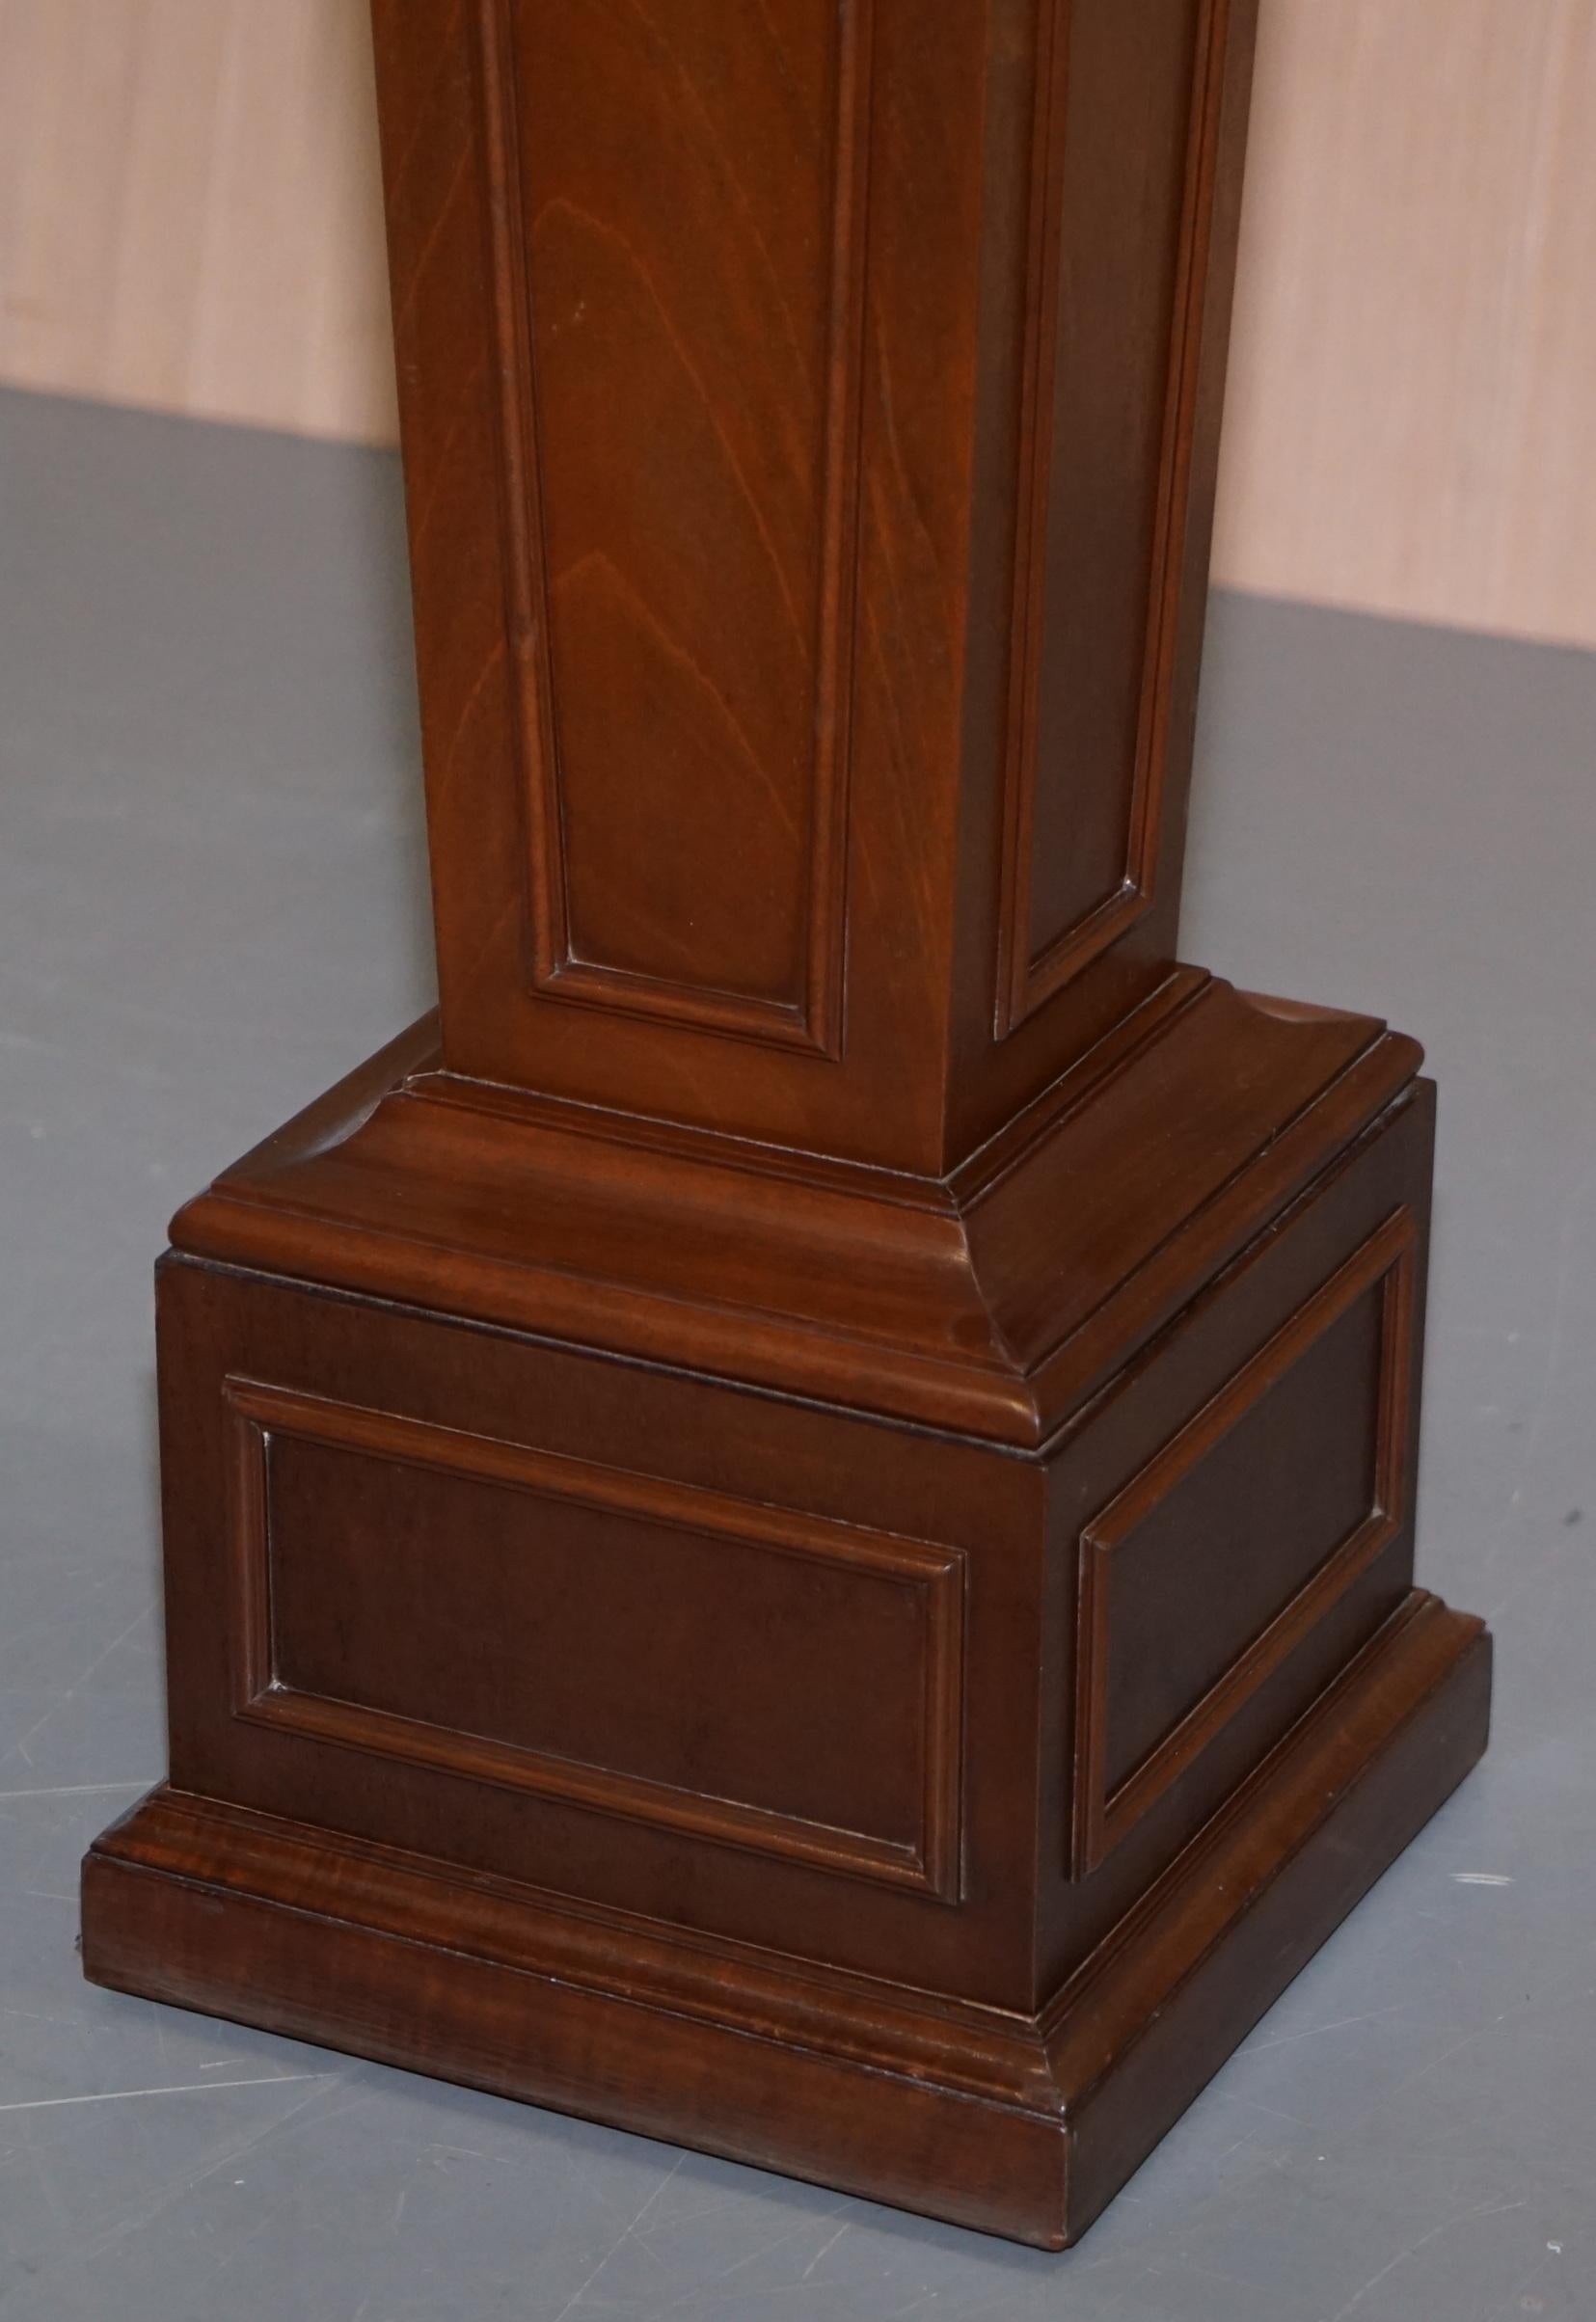 Early 20th Century Regency Style Walnut circa 1900 Pedestal Jardiniere Stand for Busts Statues Etc